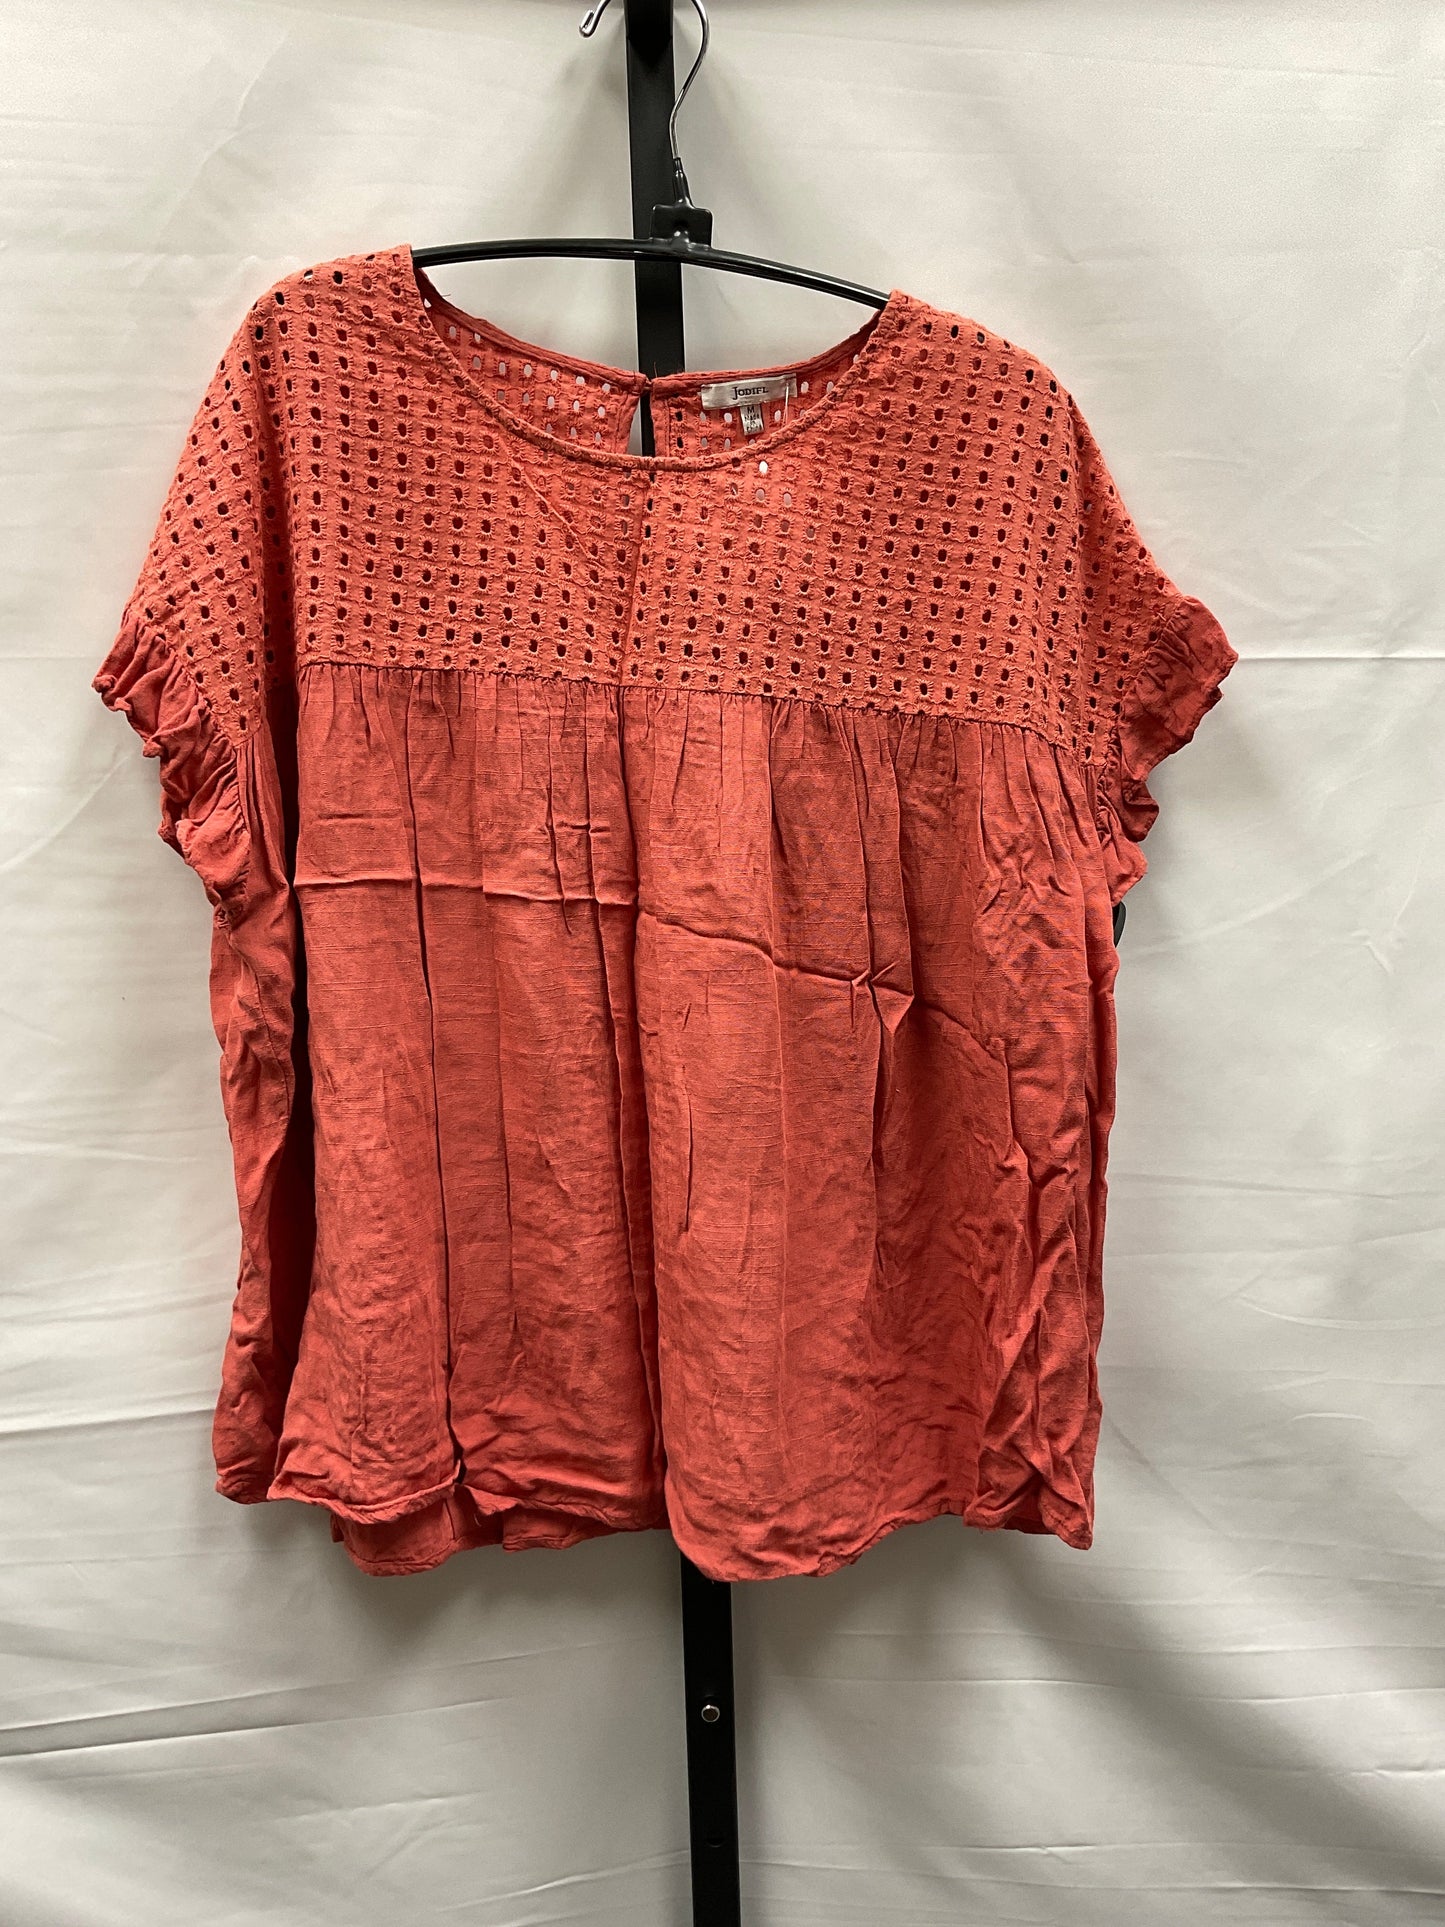 Red Top Short Sleeve Jodifl, Size M